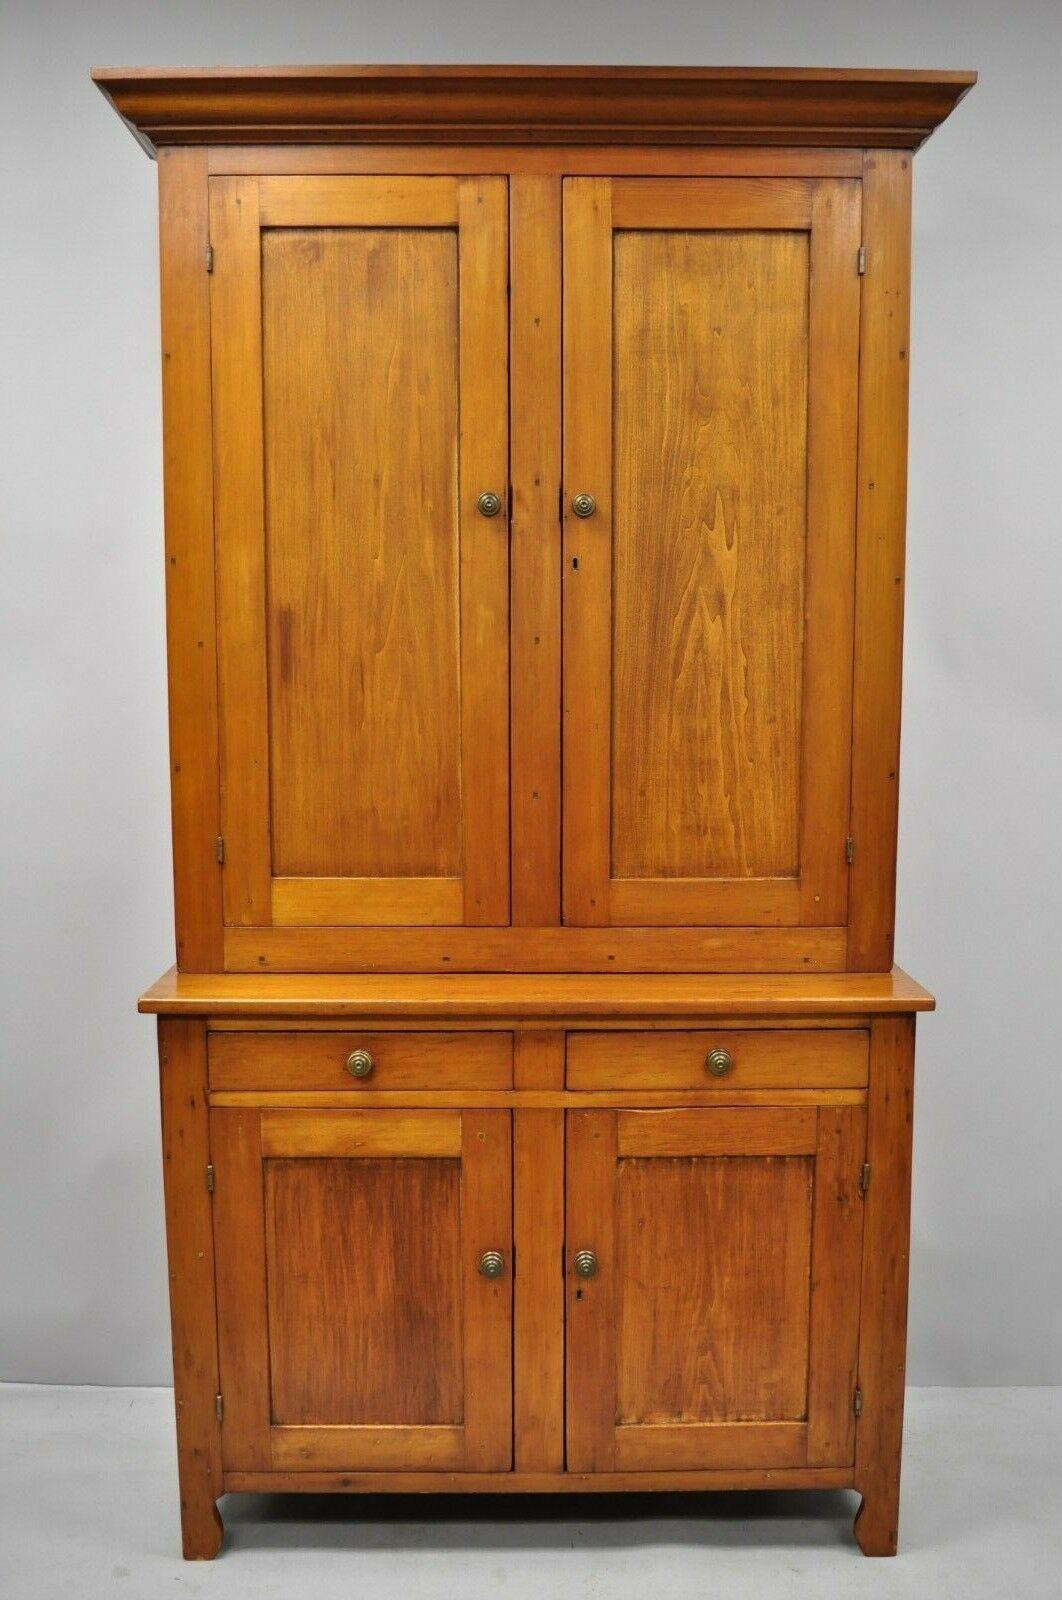 Tall 19th Century Pine Wood Blind Doors Step Back Cupboard Hutch Cabinet 4